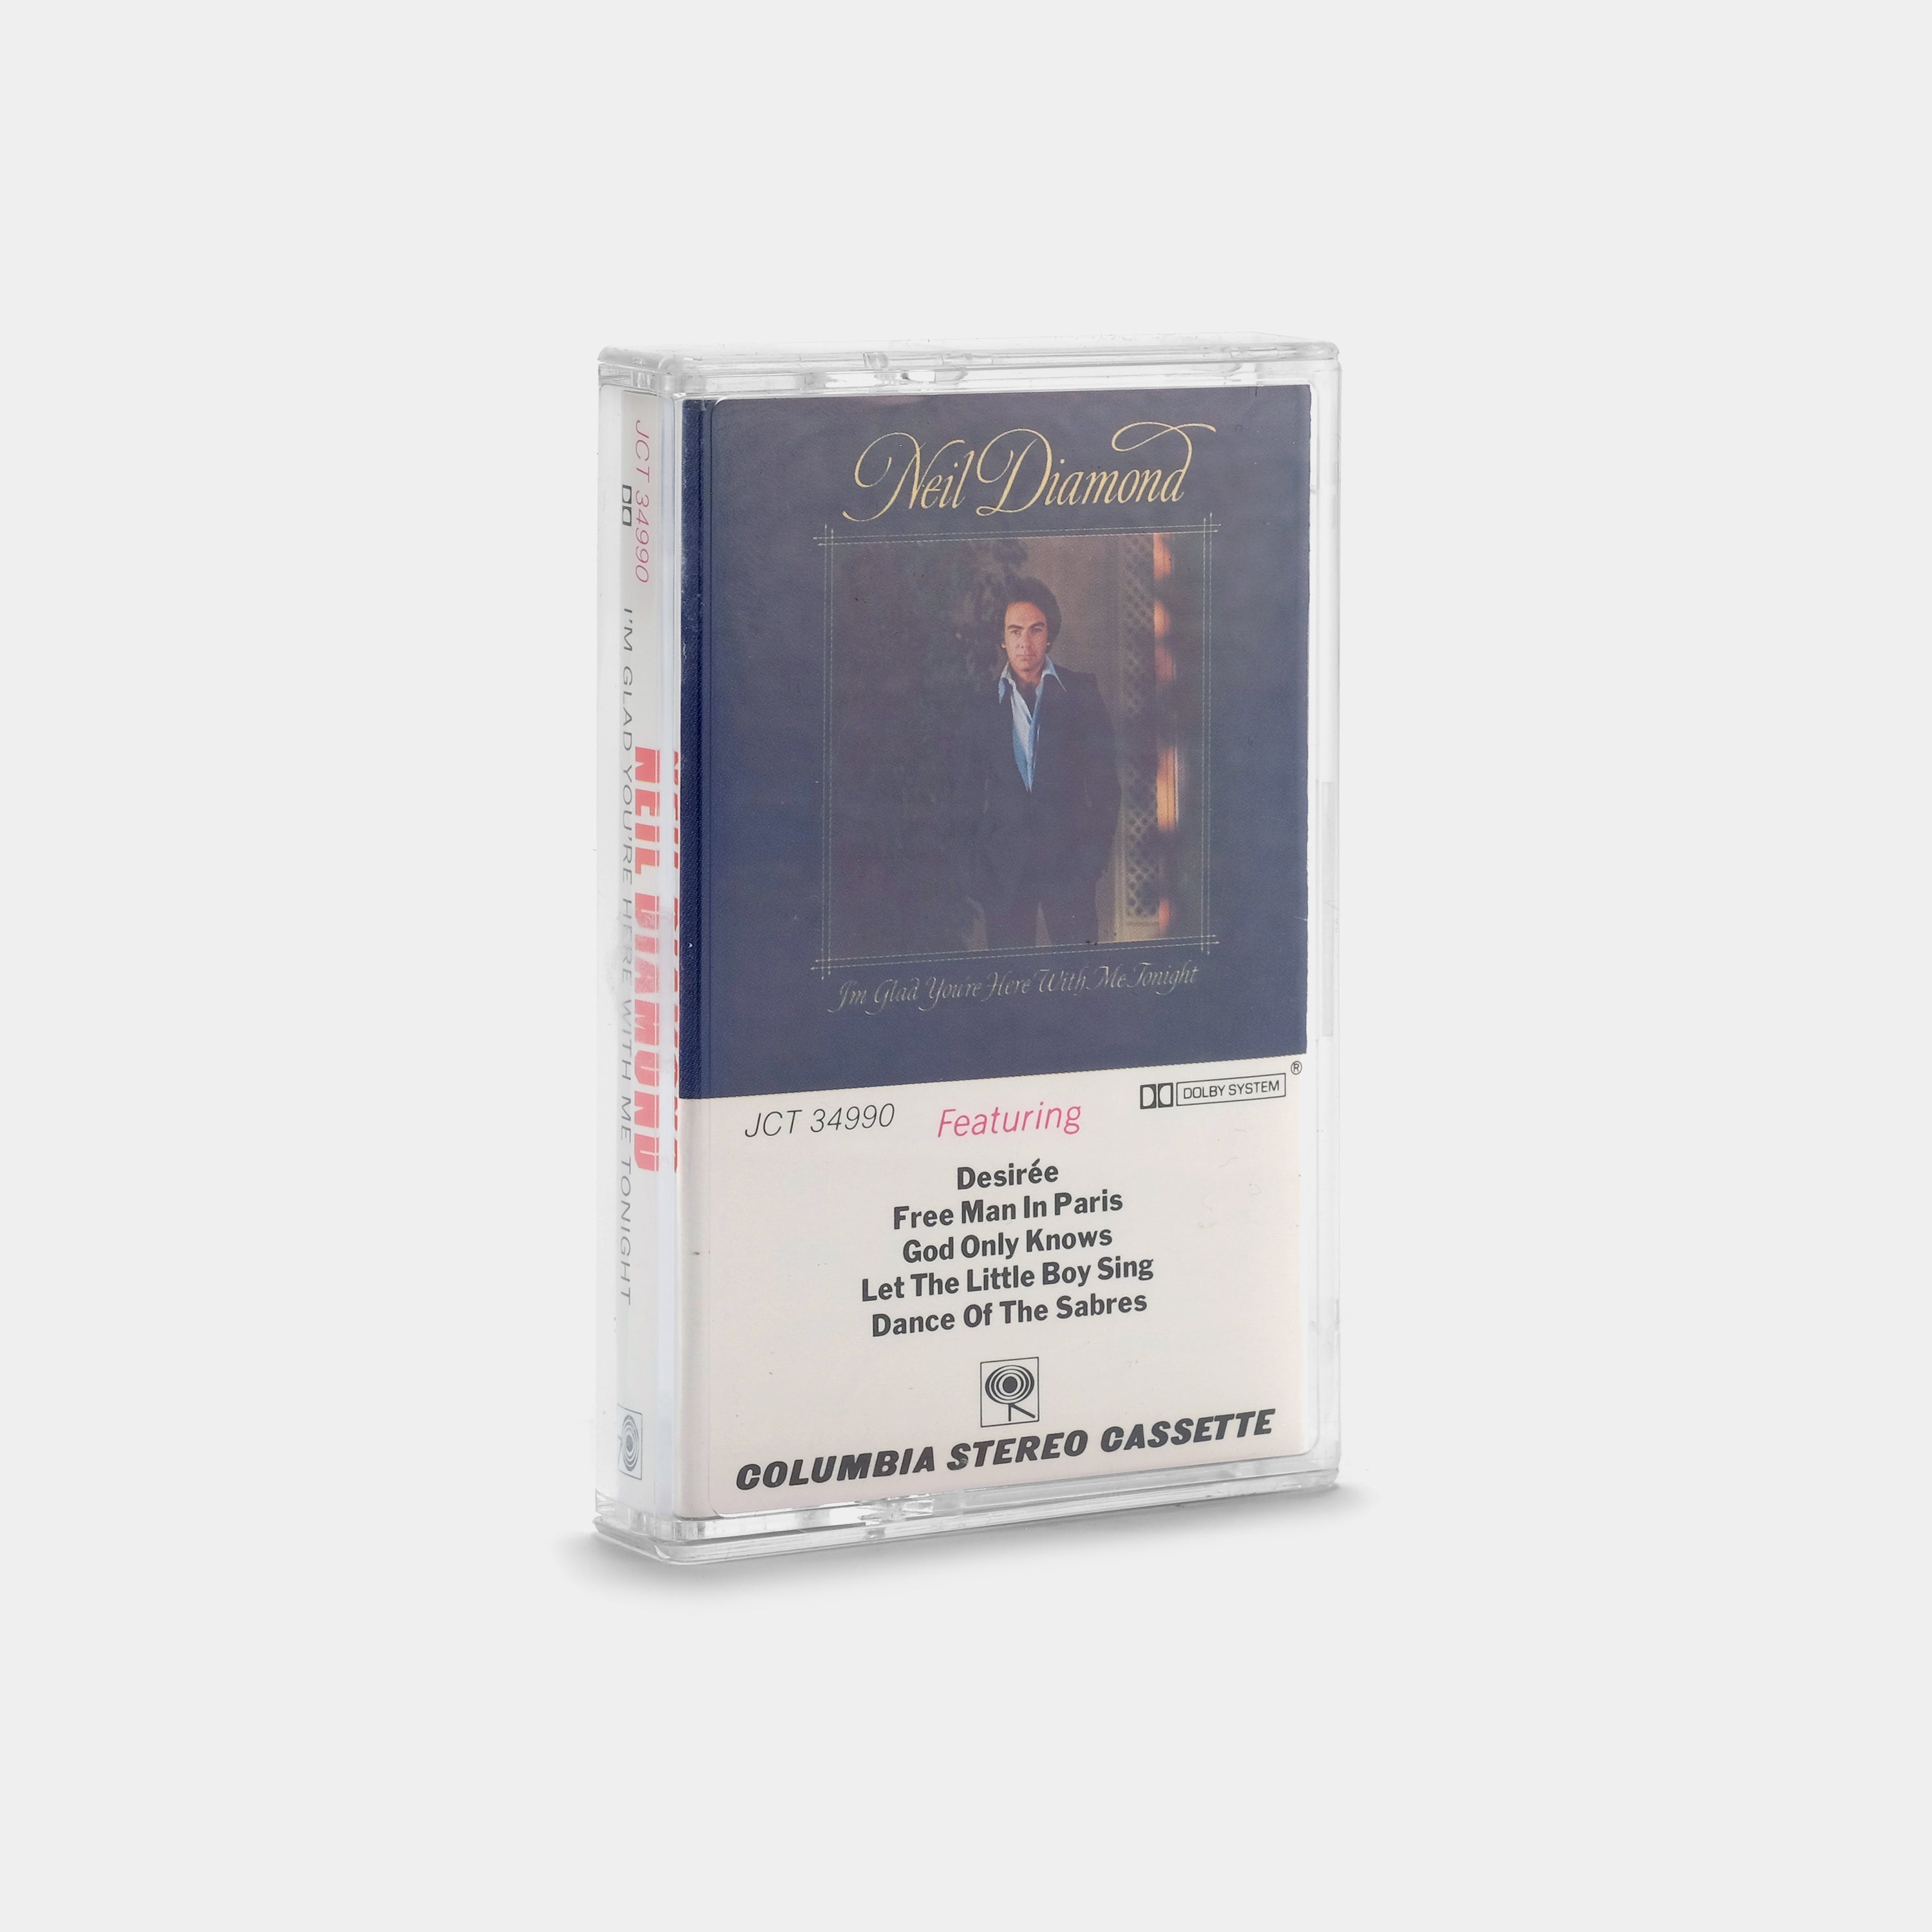 Neil Diamond - I'm Glad You're Here With Me Tonight Cassette Tape